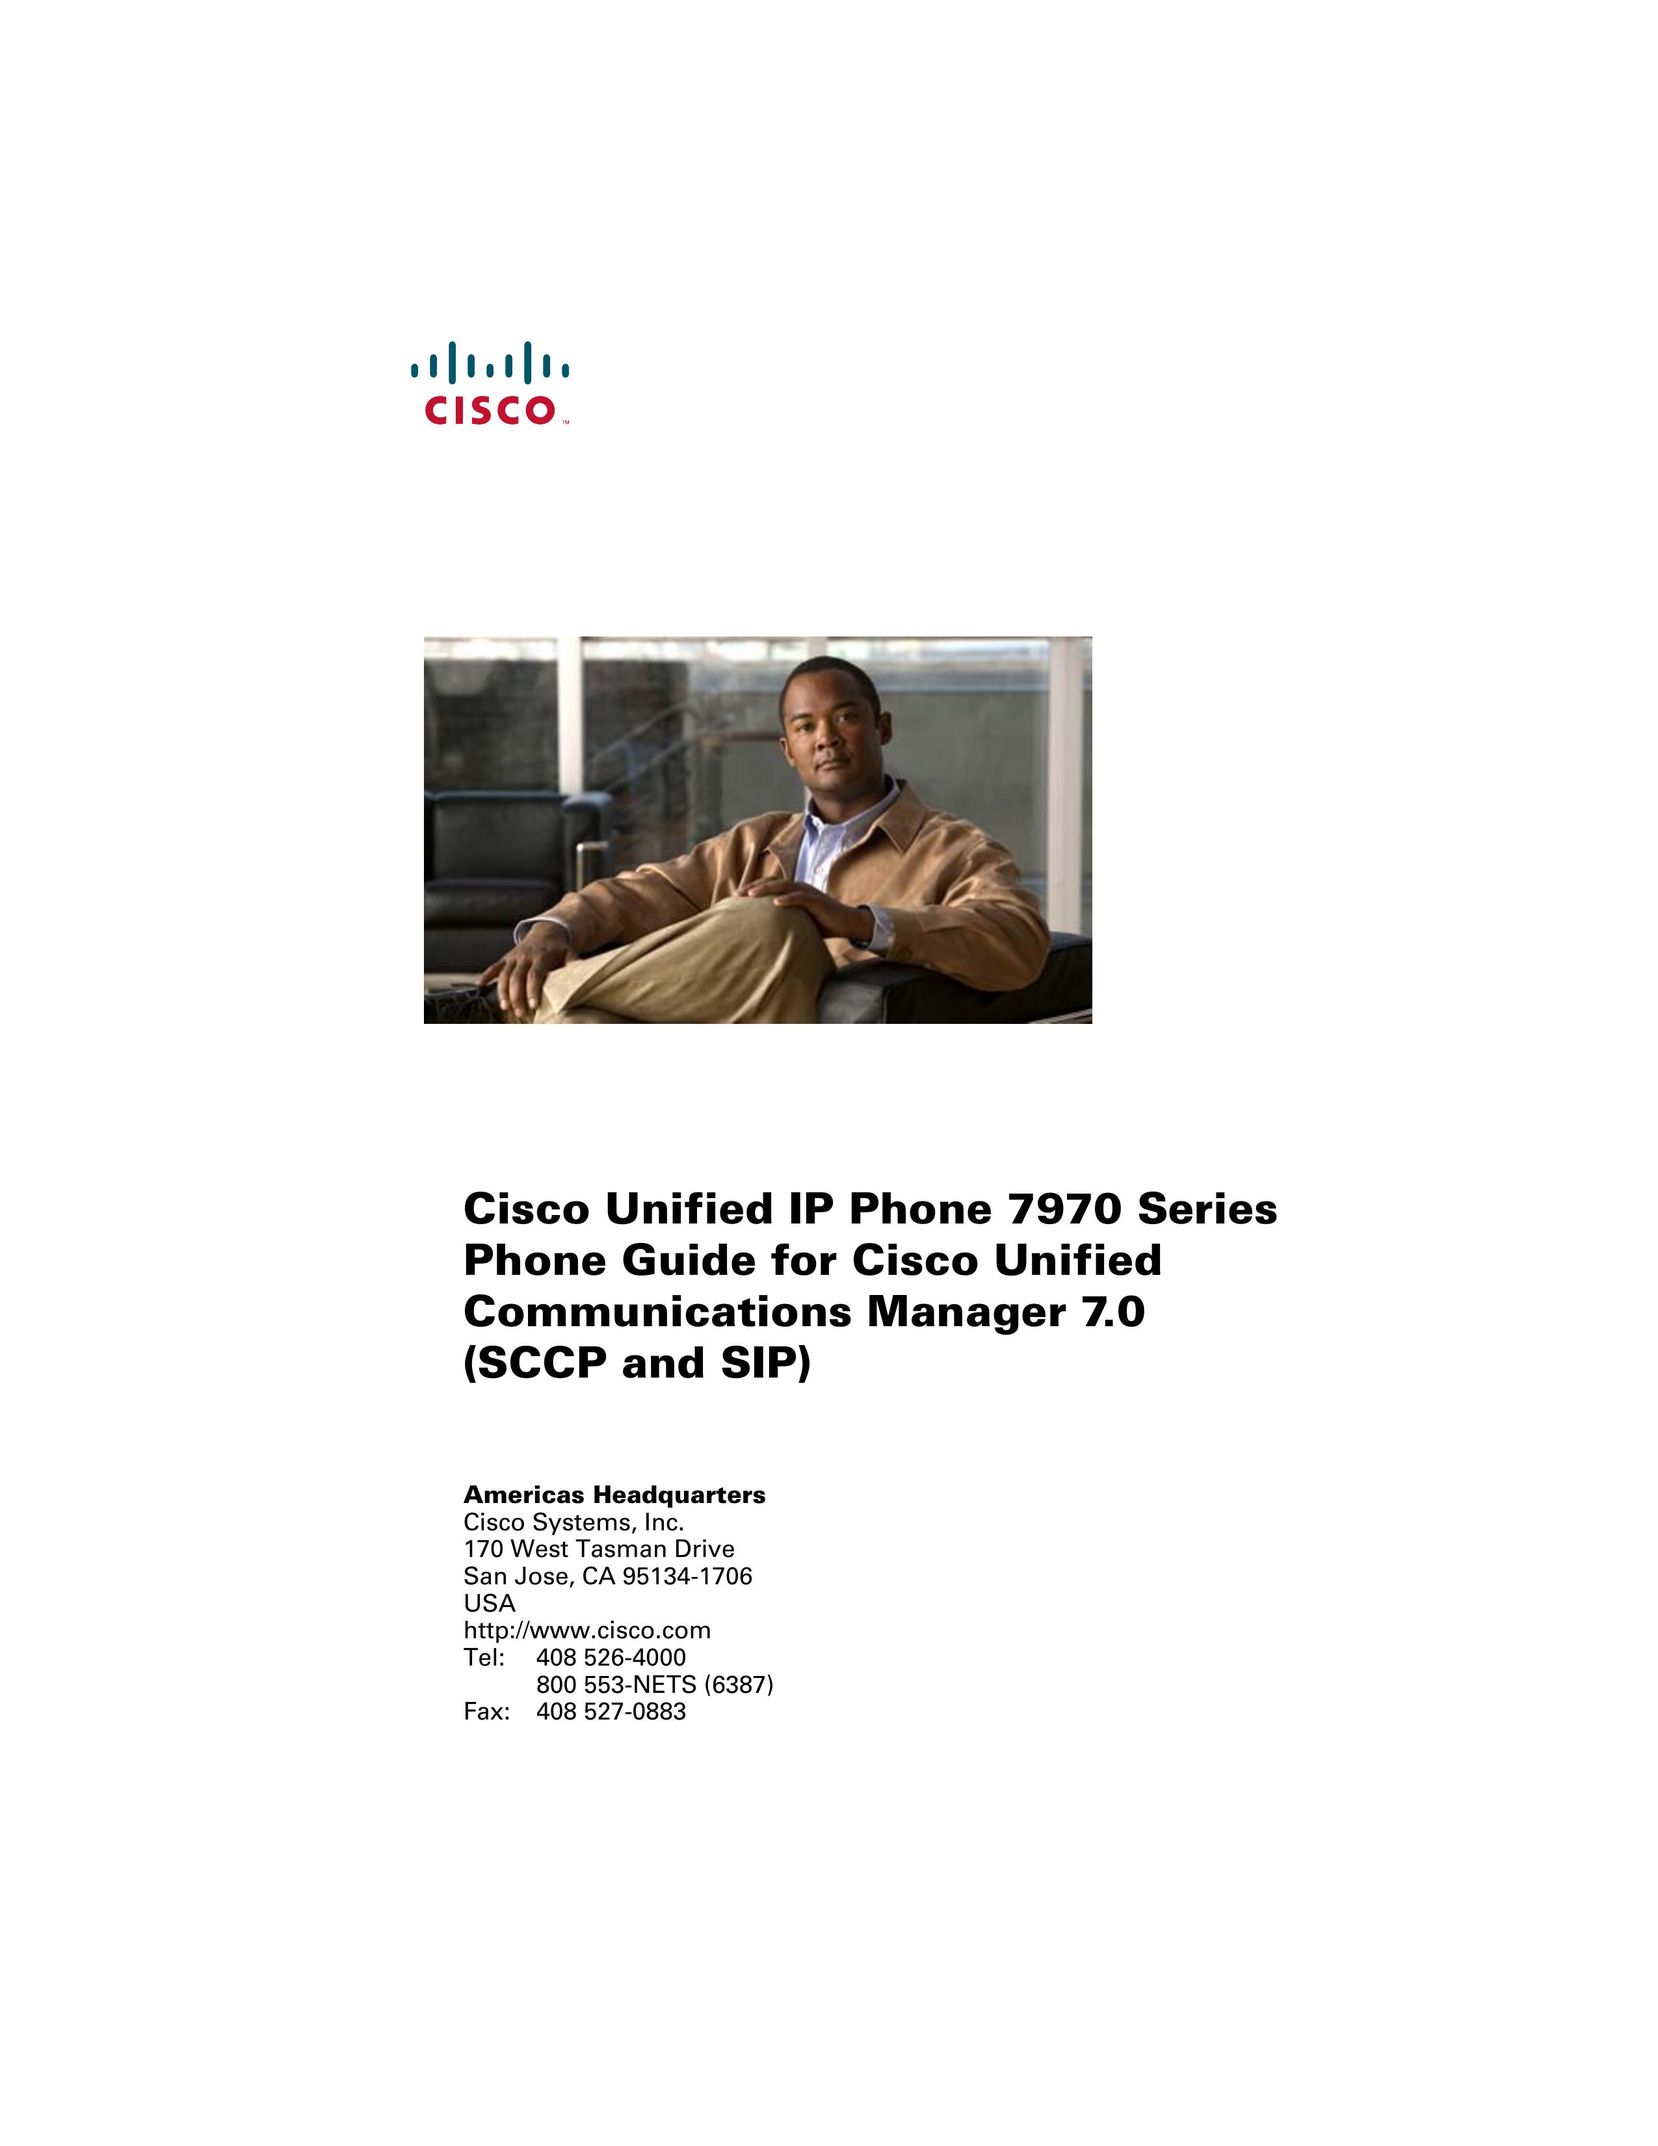 Cisco Systems CP7970GRF Conference Phone User Manual